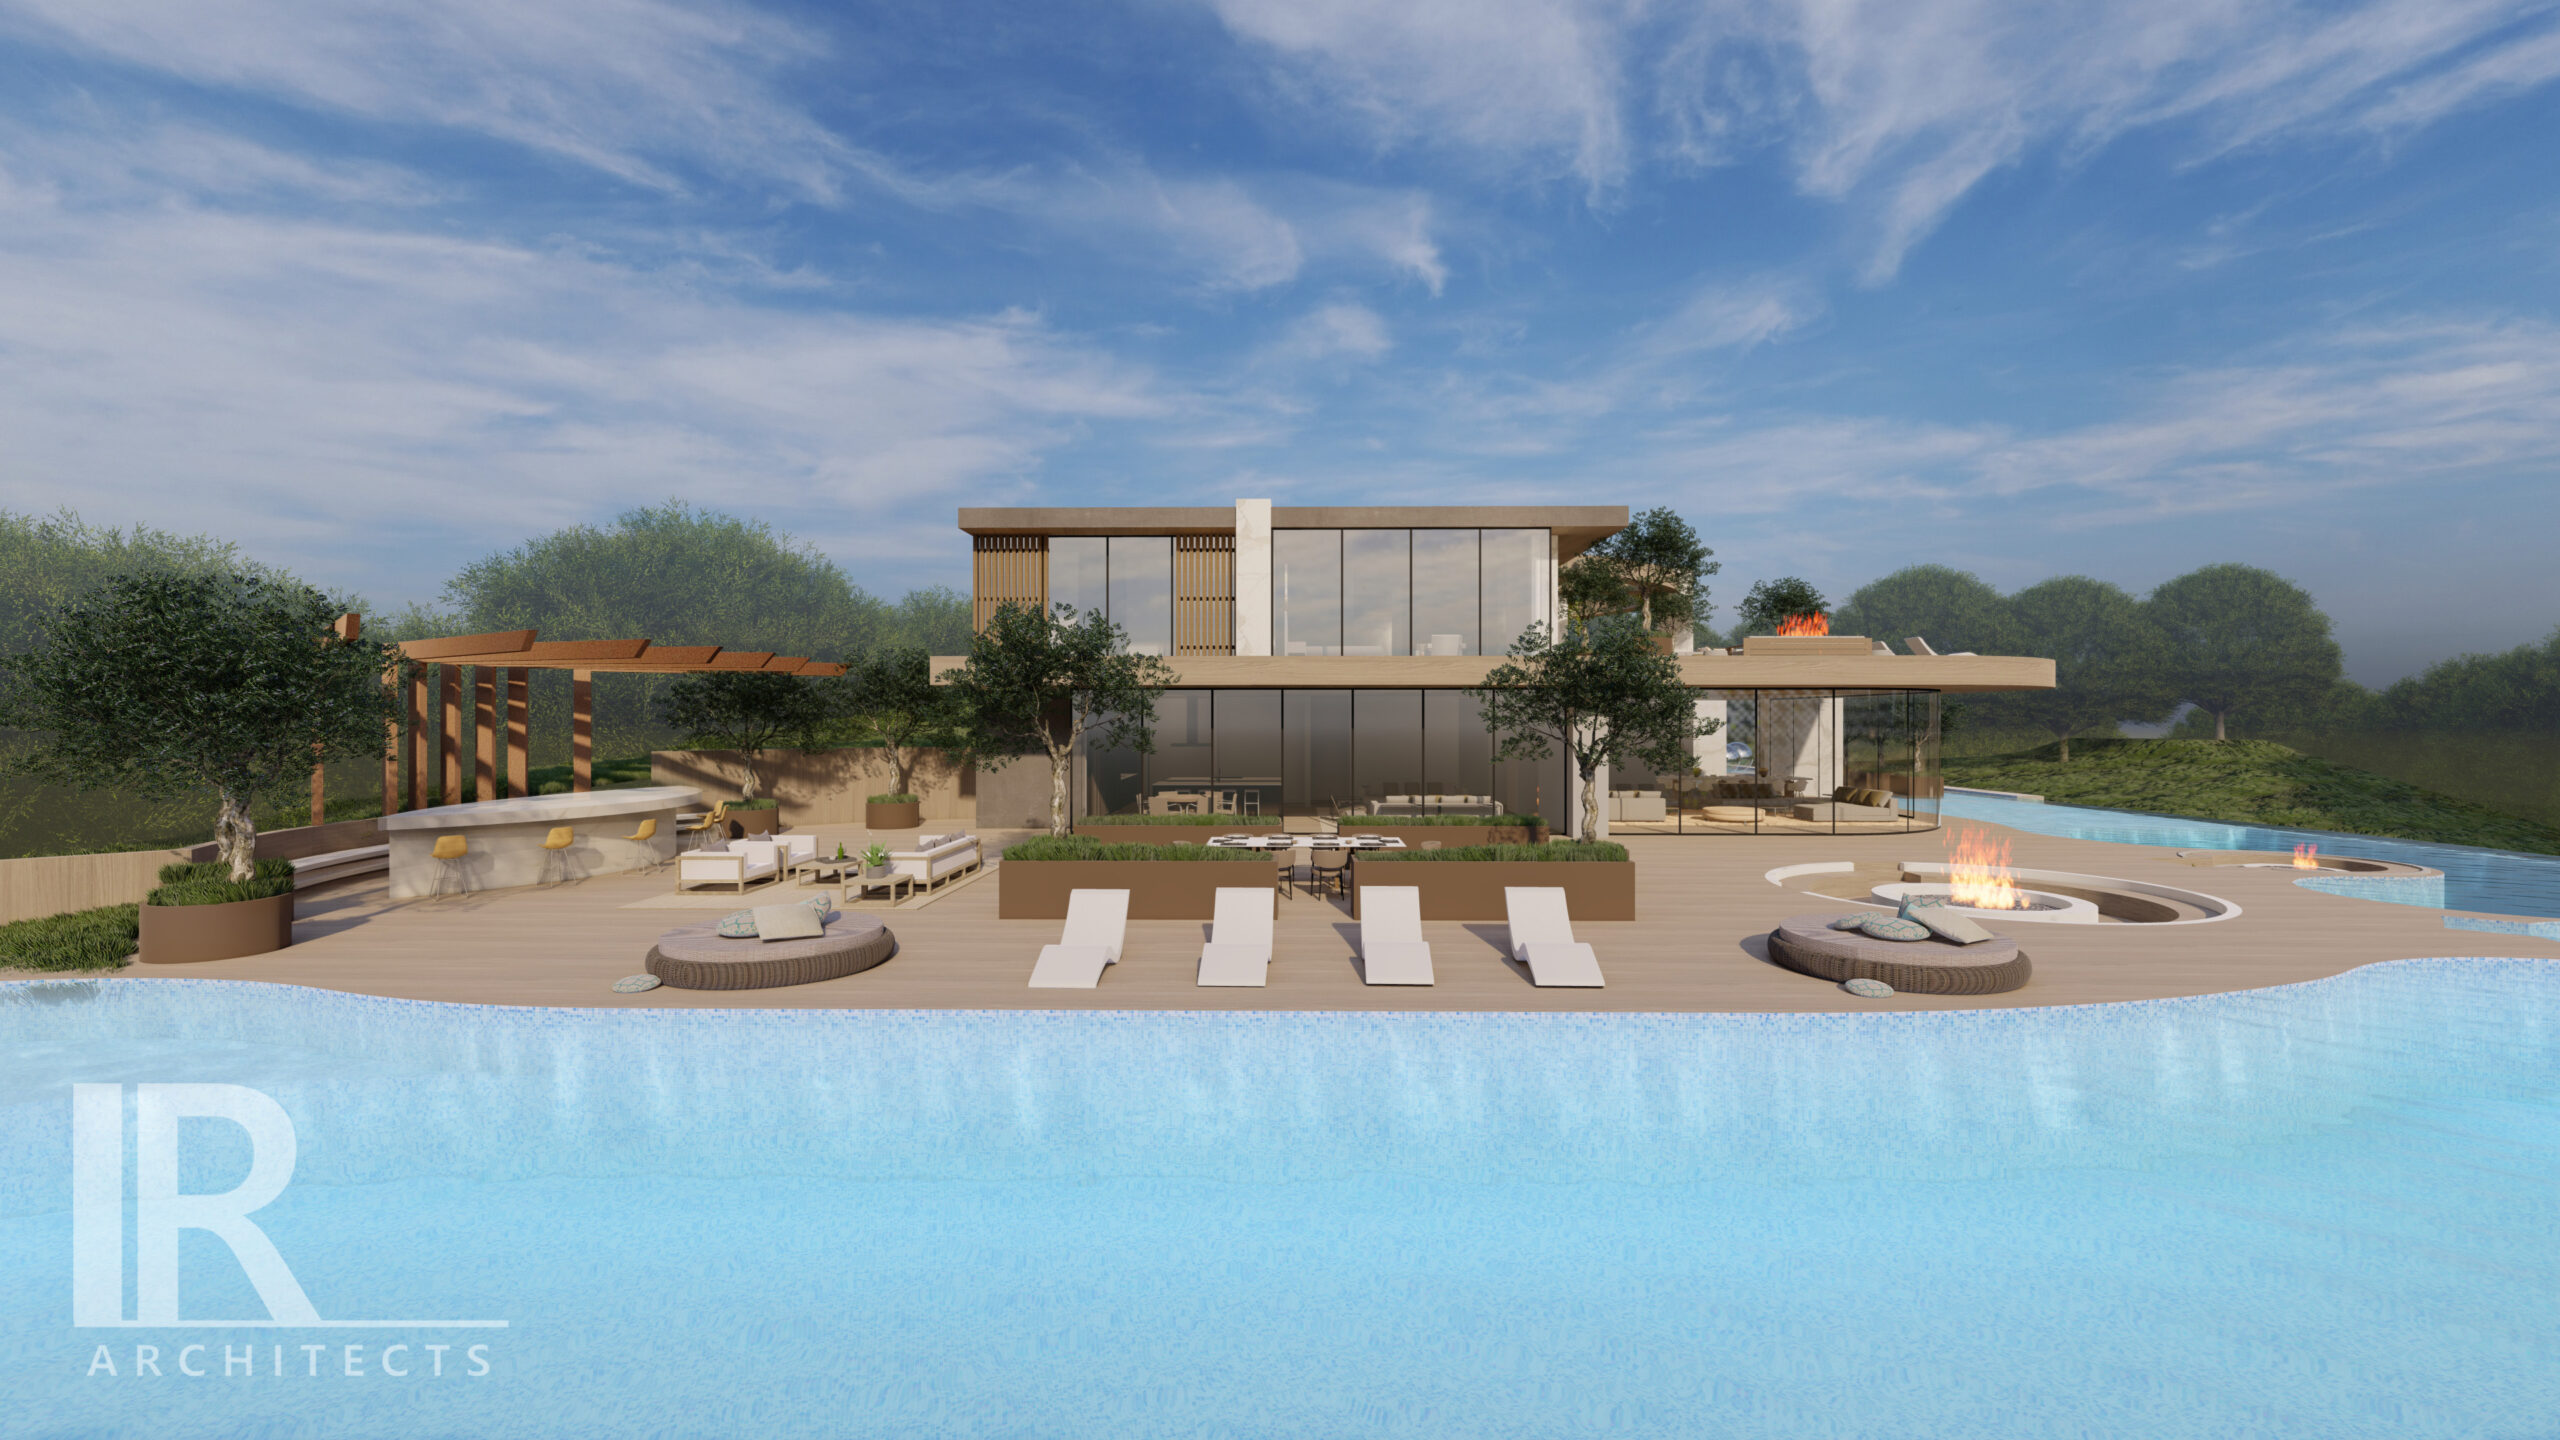 A rendering of the pool and lounge chairs in front of a house.